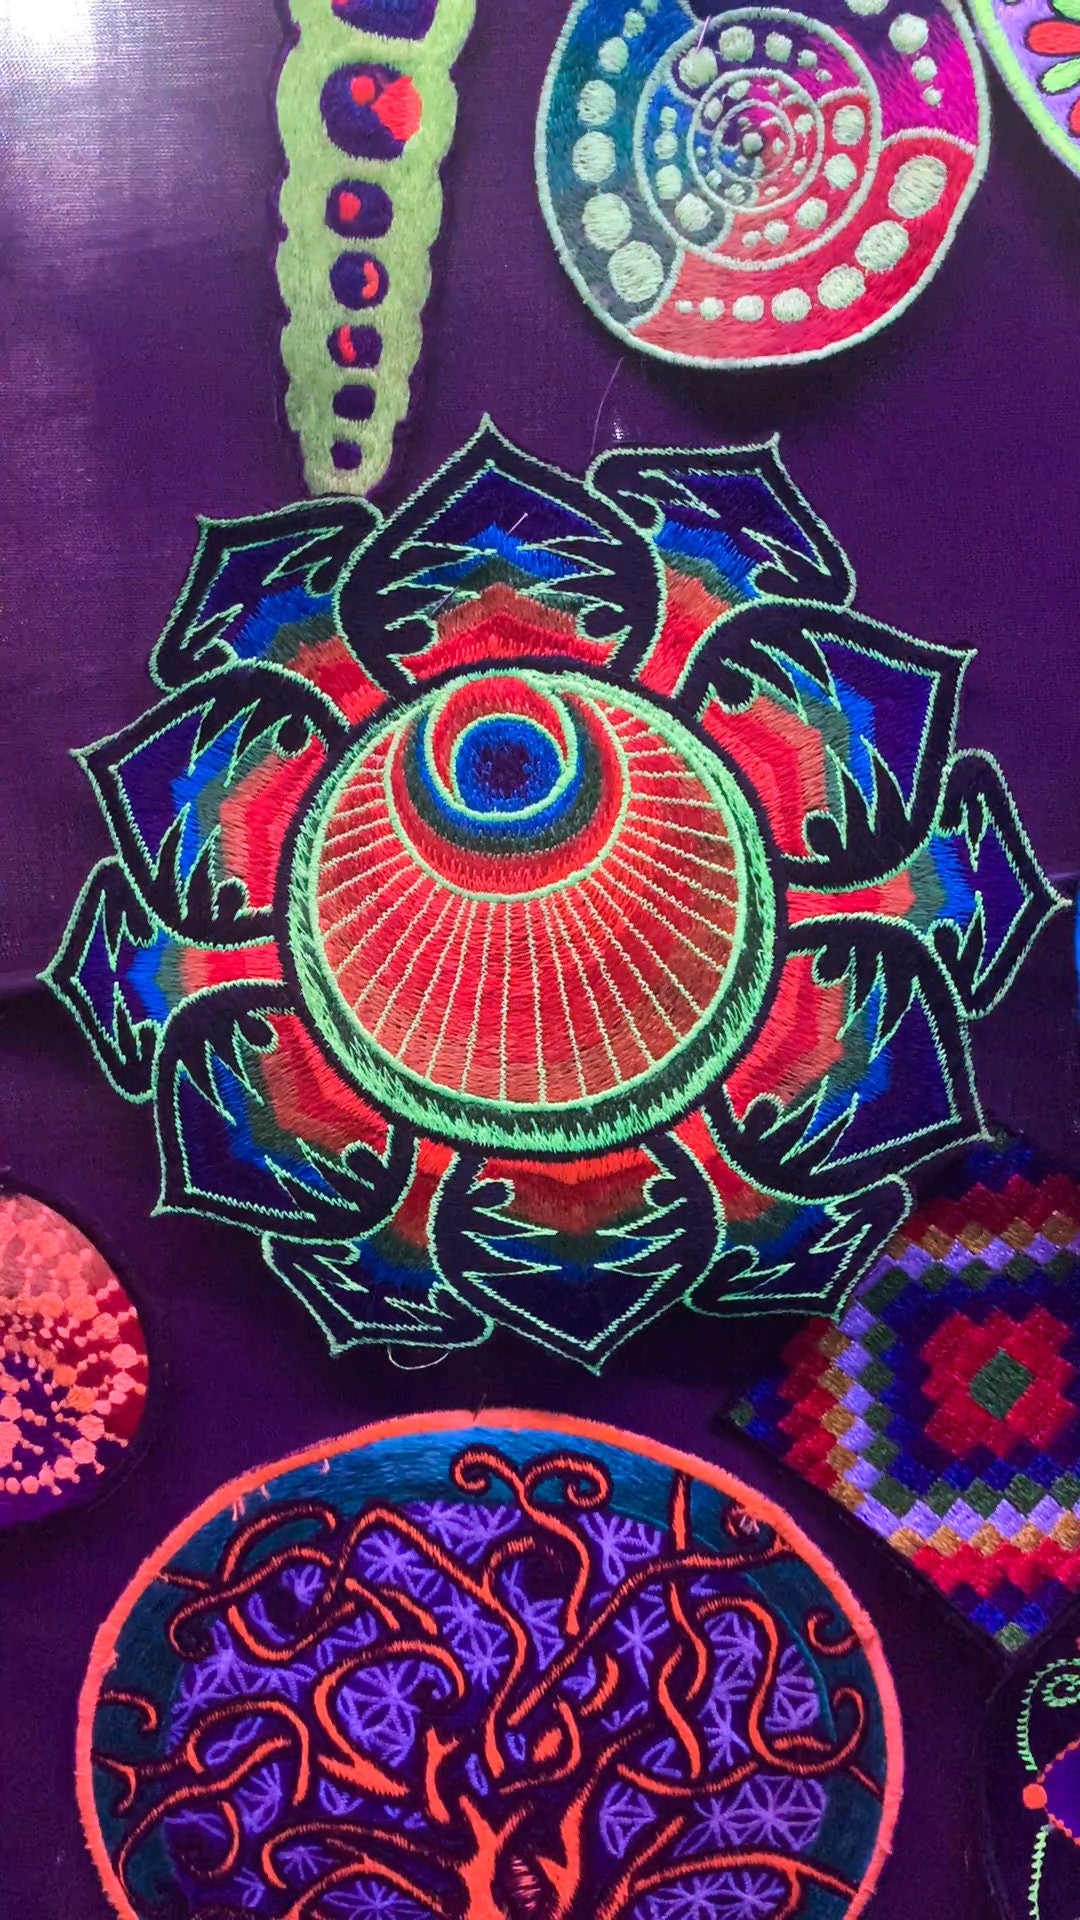 The Rainbow Angel crop circle patch embroidery mandala divine protection ufo Alien Extraterrestrial Art Sacred Geometry Psytrance Culture